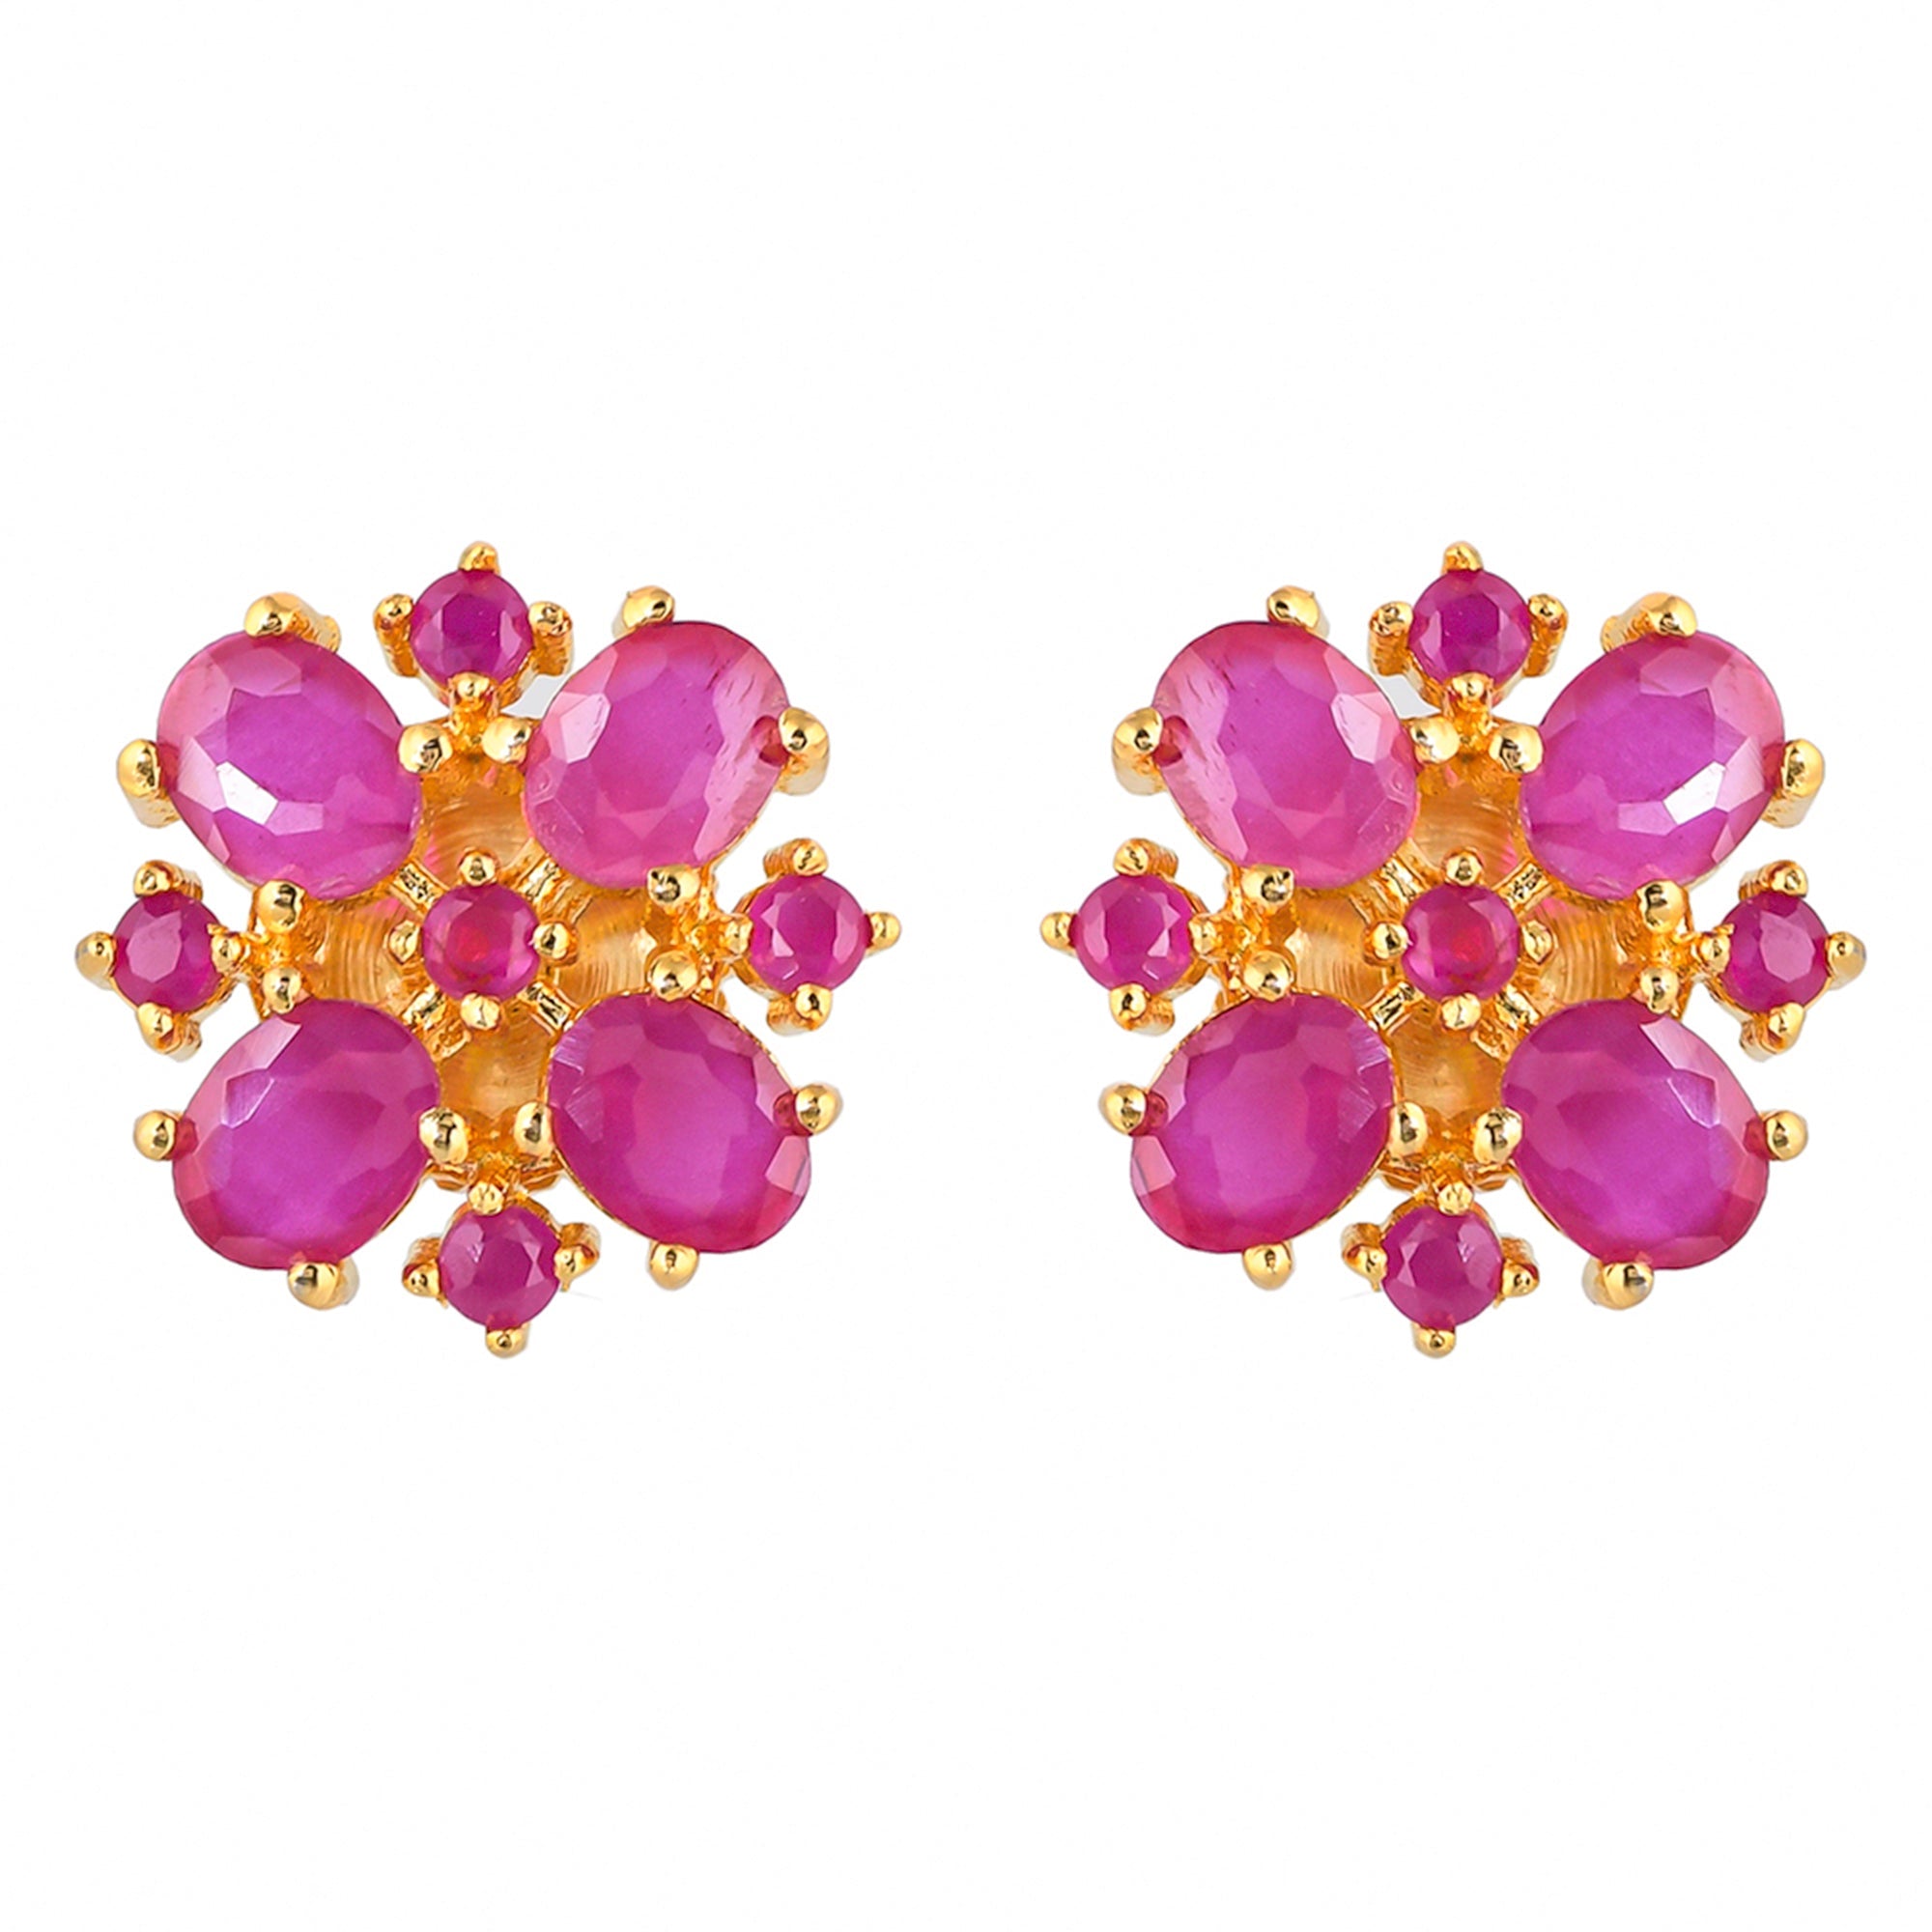 Women's Gold Plated Pink Cluster Setting Cz Stud Earrings - Voylla